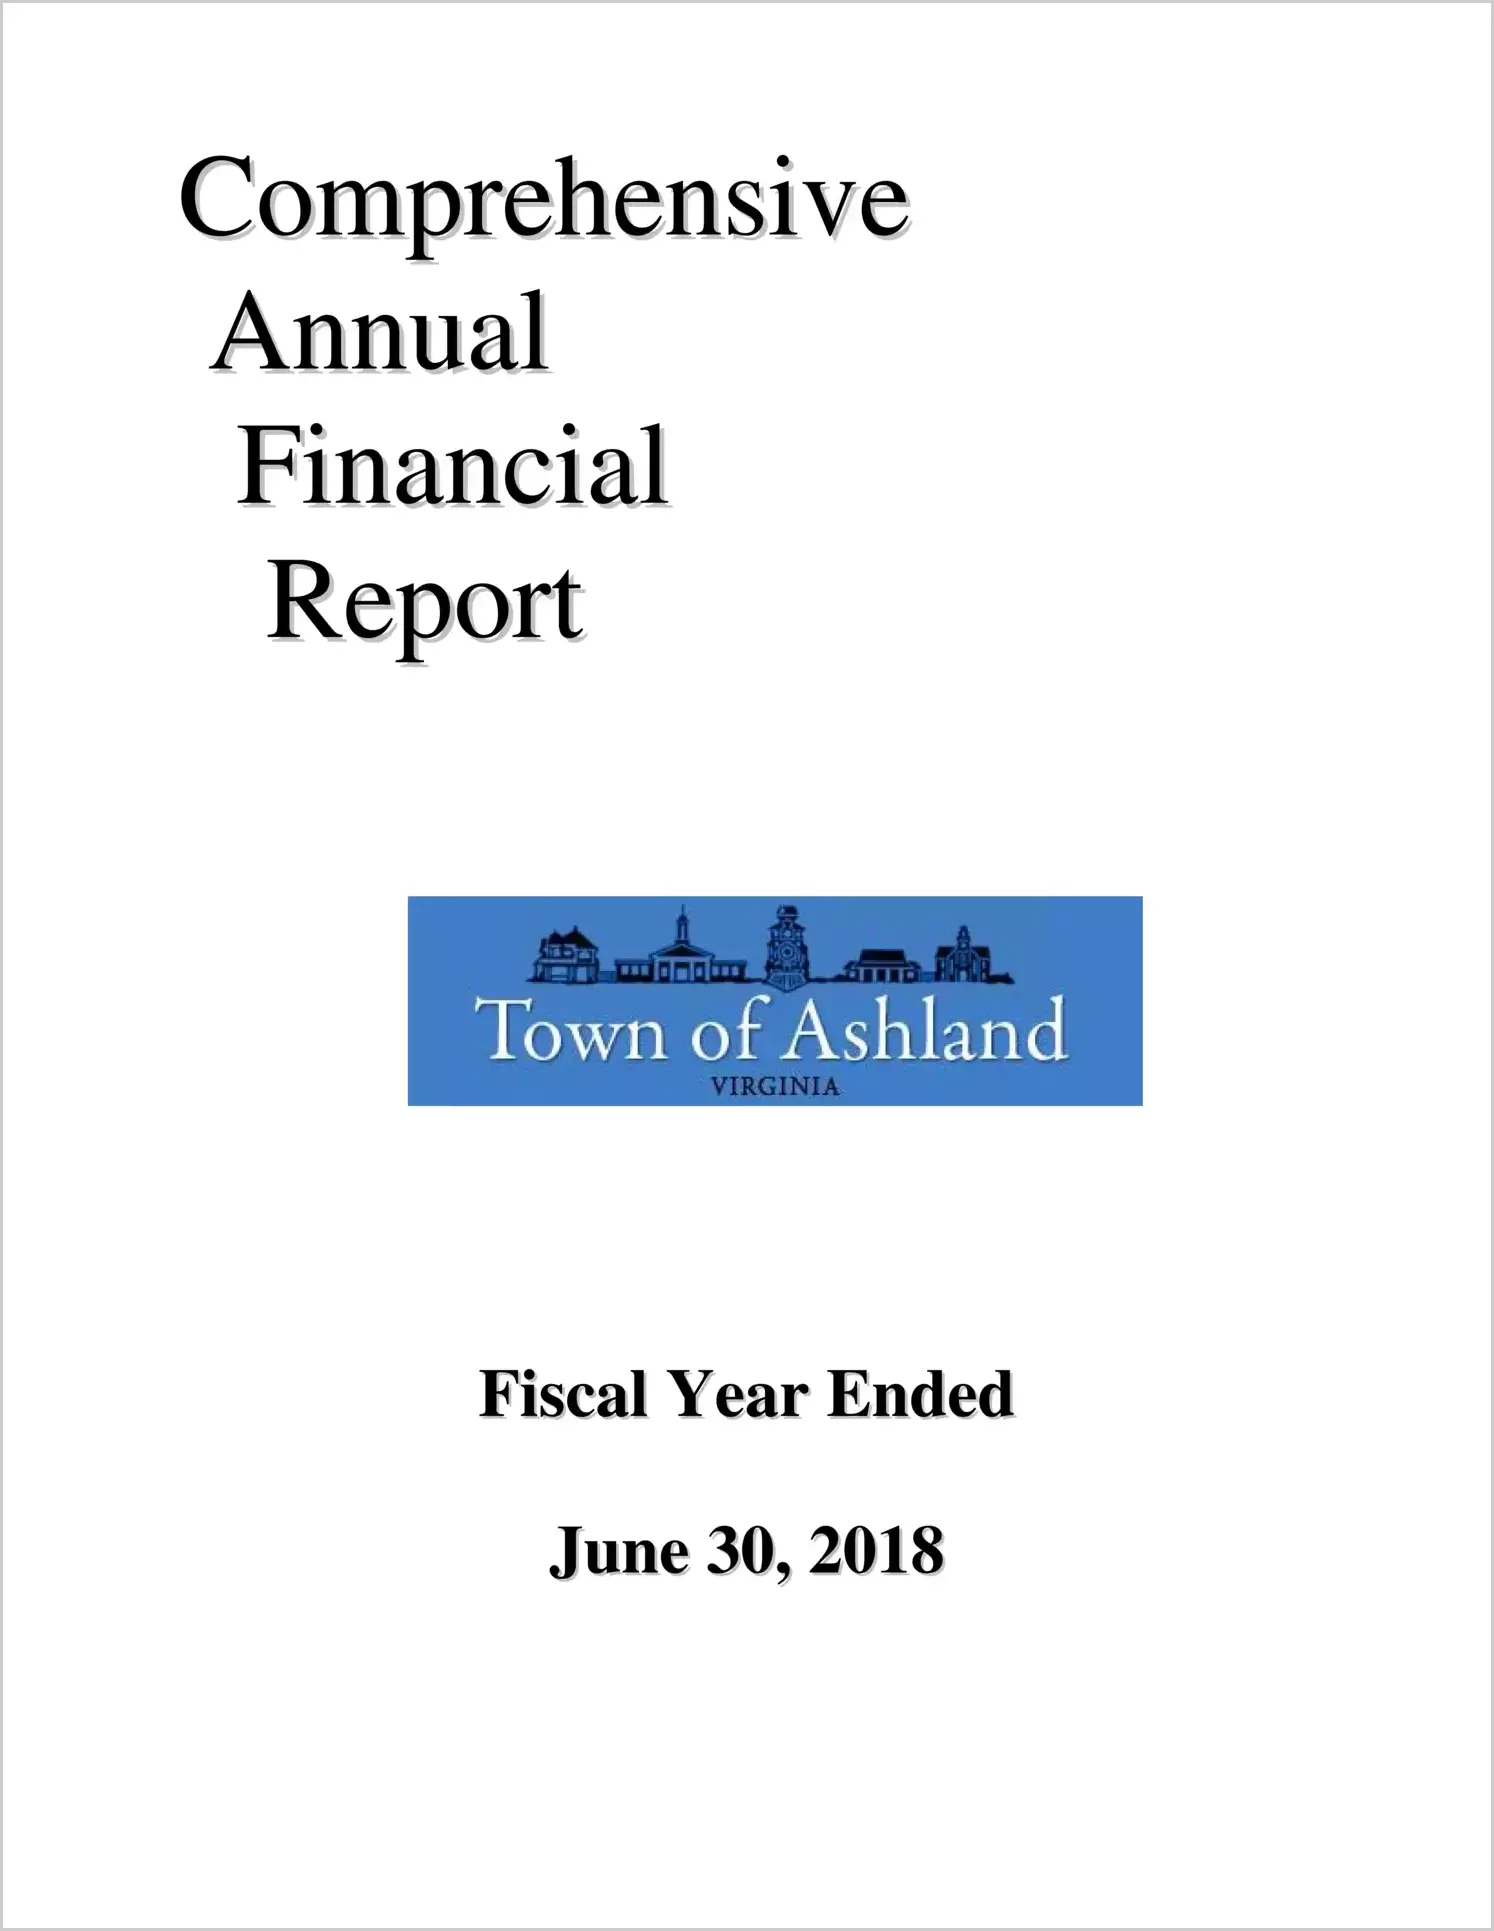 2018 Annual Financial Report for Town of Ashland